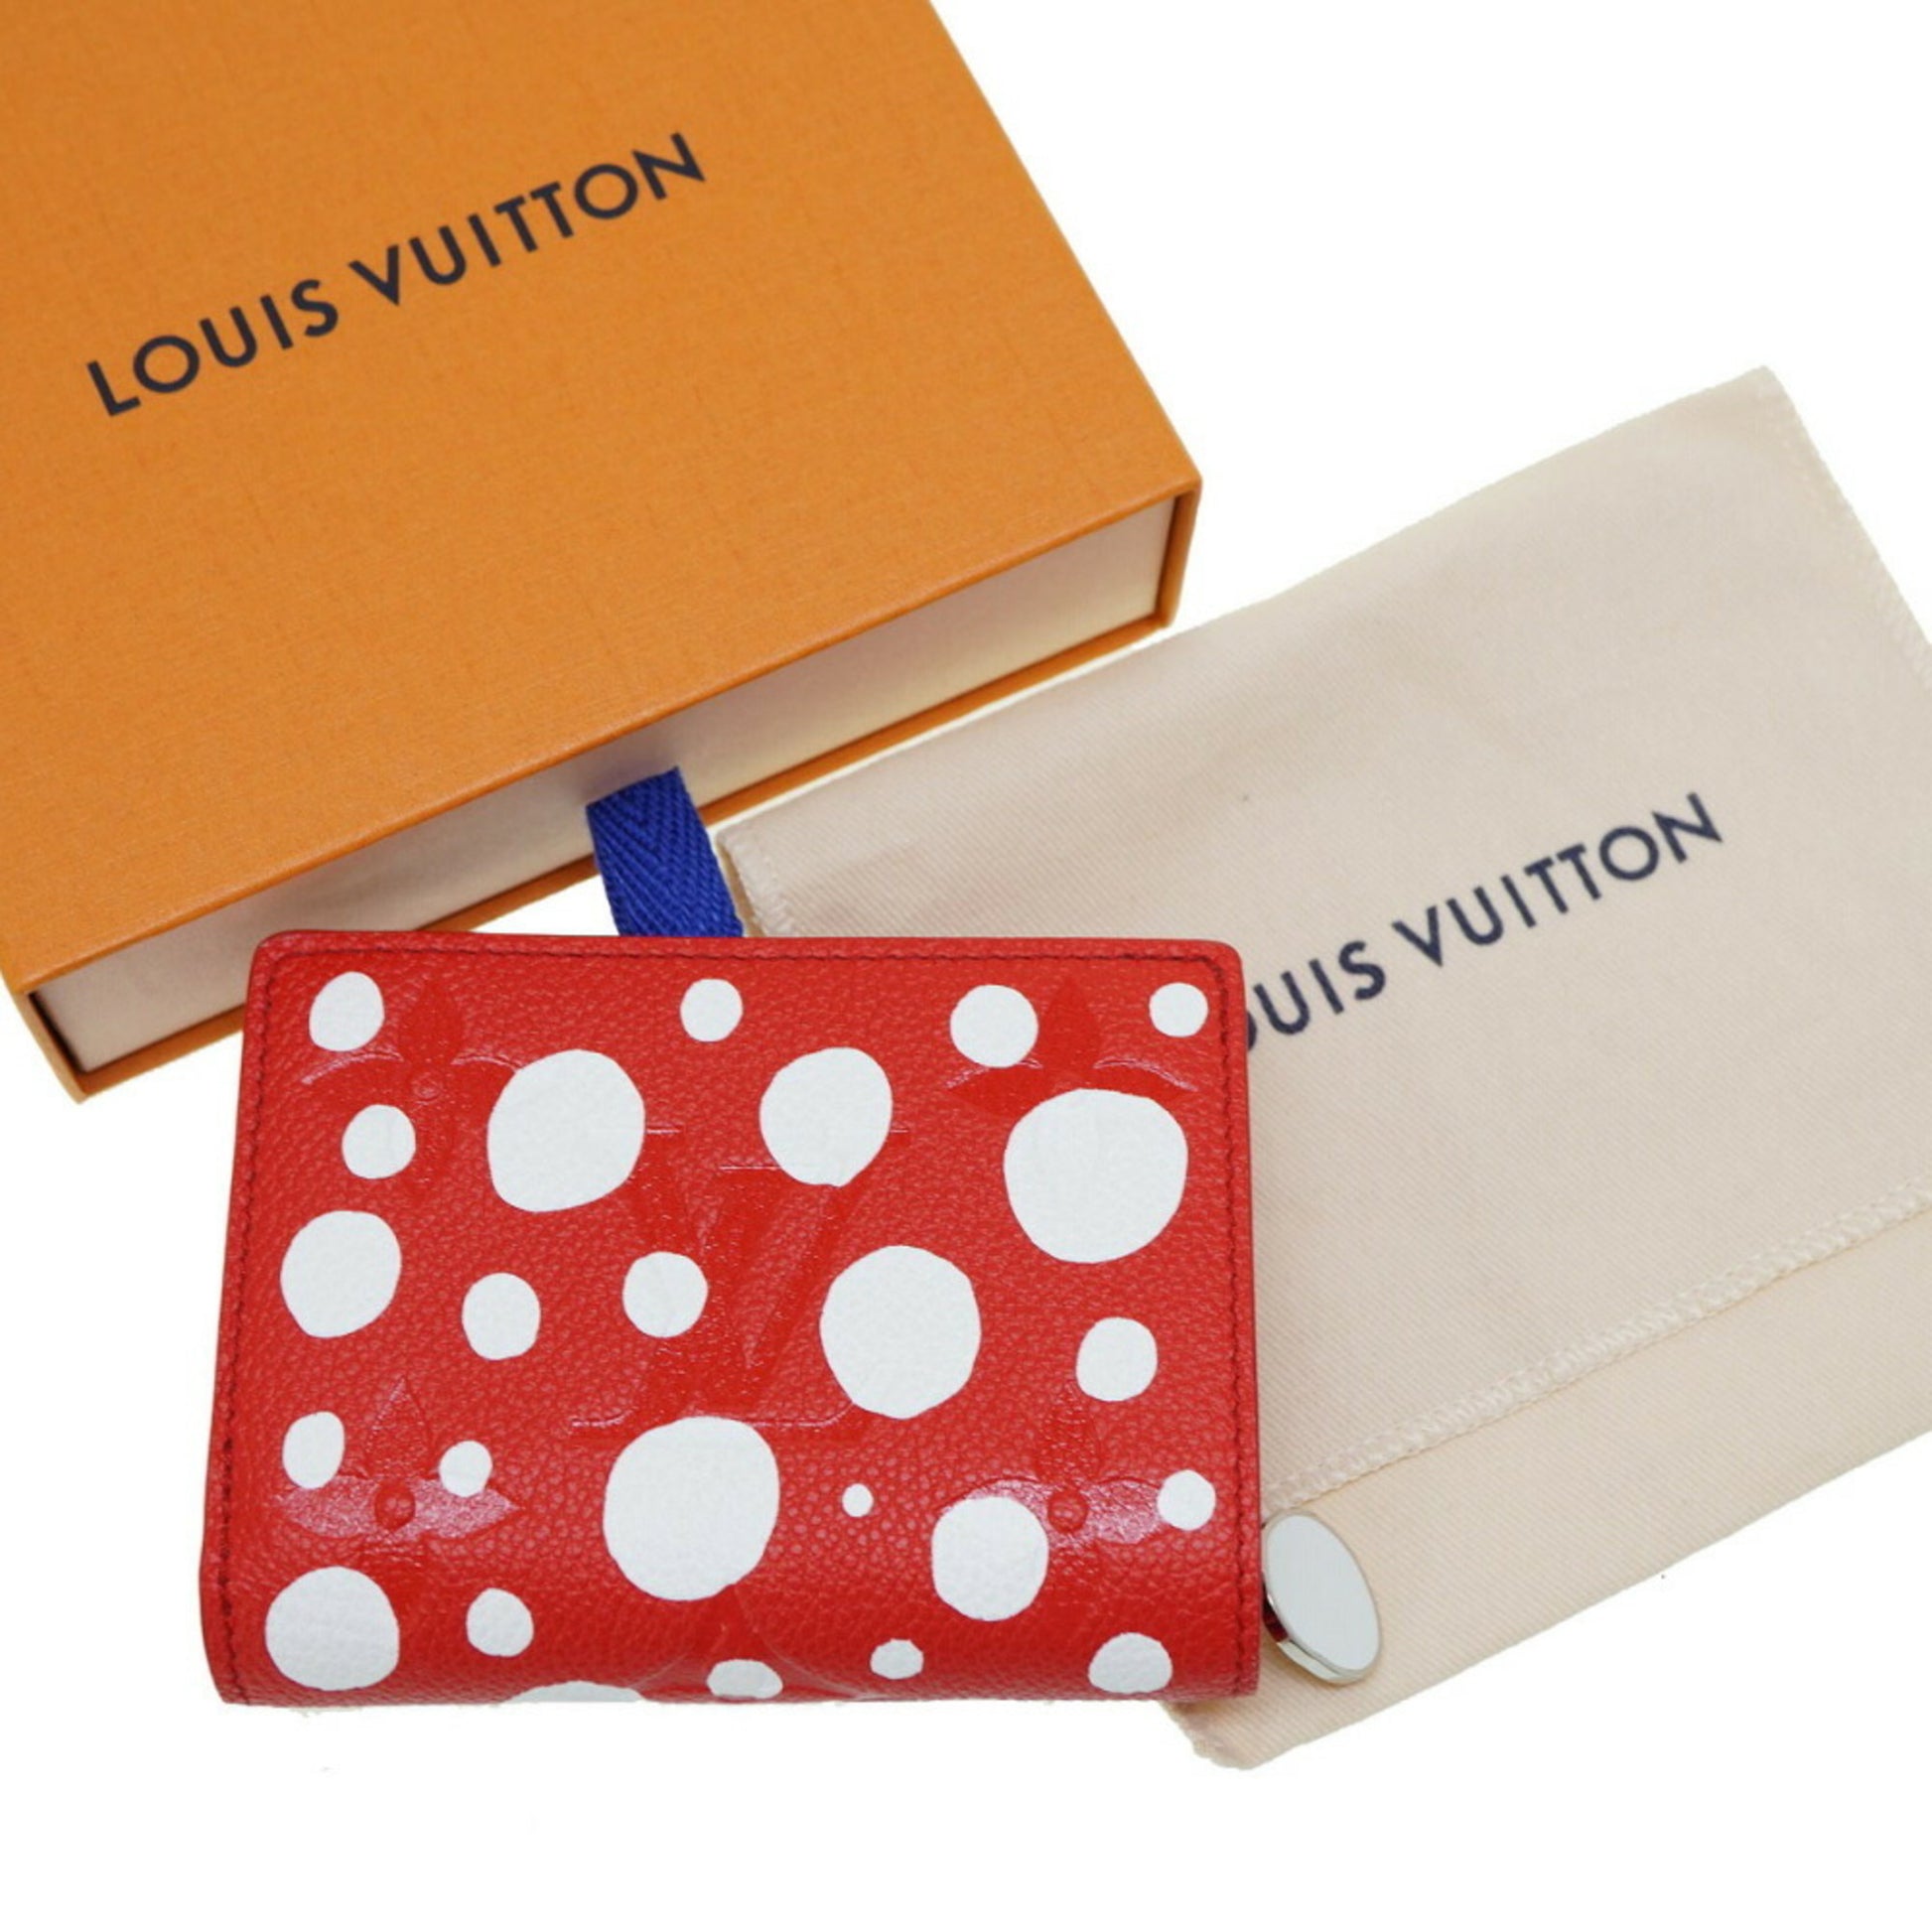 Louis Vuitton Yayoi Kusama Portefeuille M82103 Bifold Wallet Leather Red  White